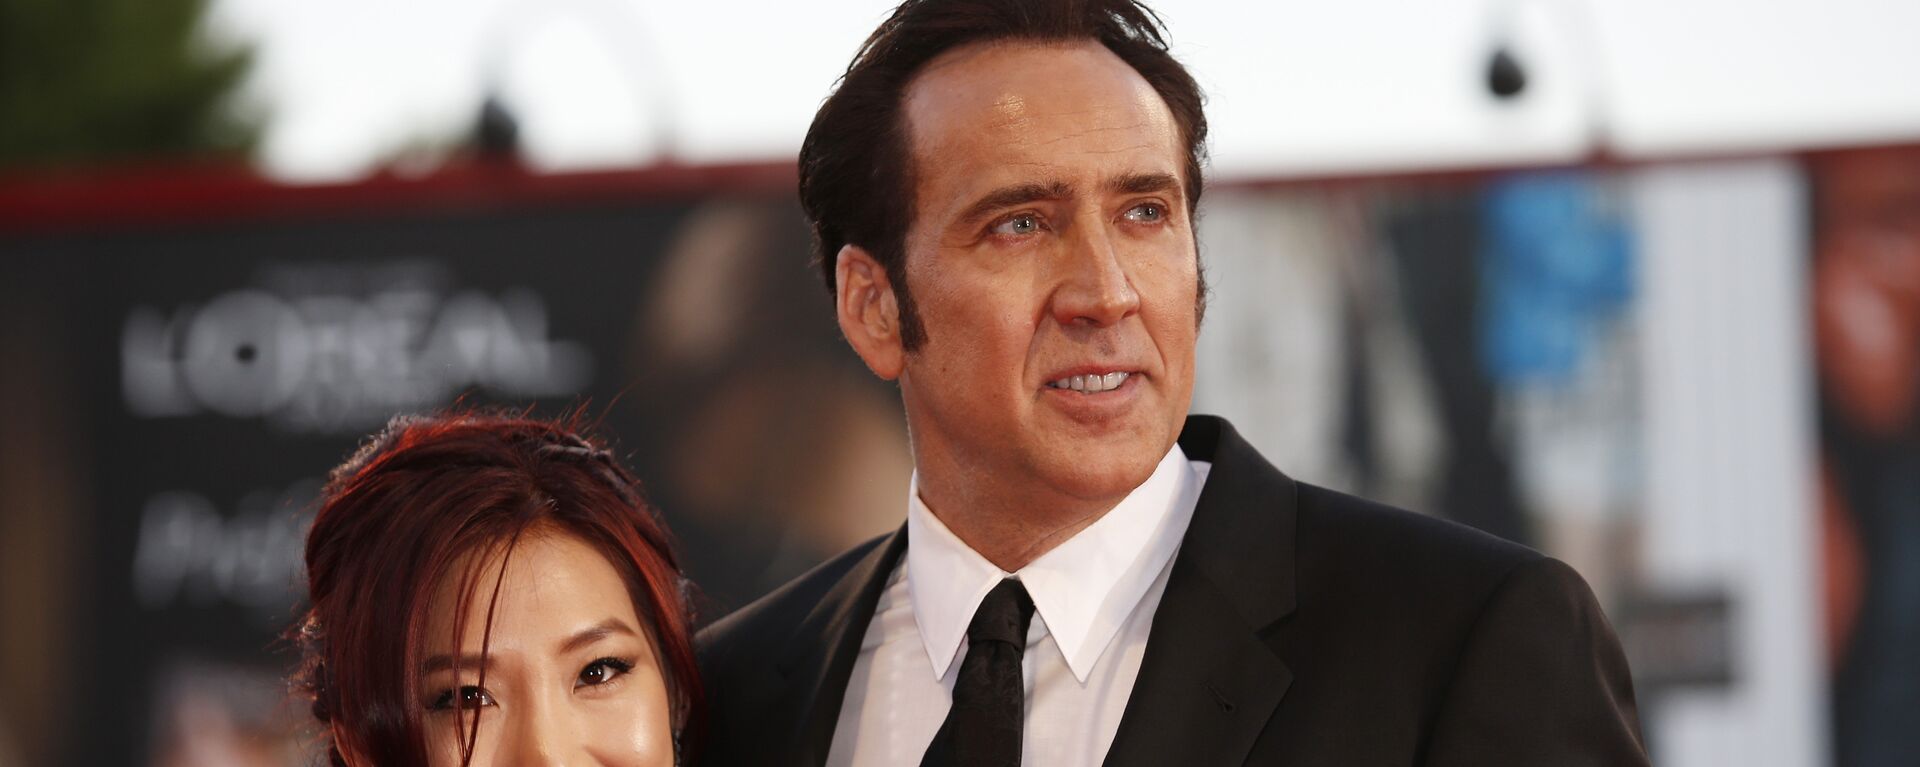 Actor Nicolas Cage, right, and his wife Alice Kim arrive for the screening of the film Joe at the 70th edition of the Venice Film Festival held from Aug. 28 through Sept. 7, in Venice, Italy, Friday, Aug. 30, 2013 - Sputnik Mundo, 1920, 28.10.2021